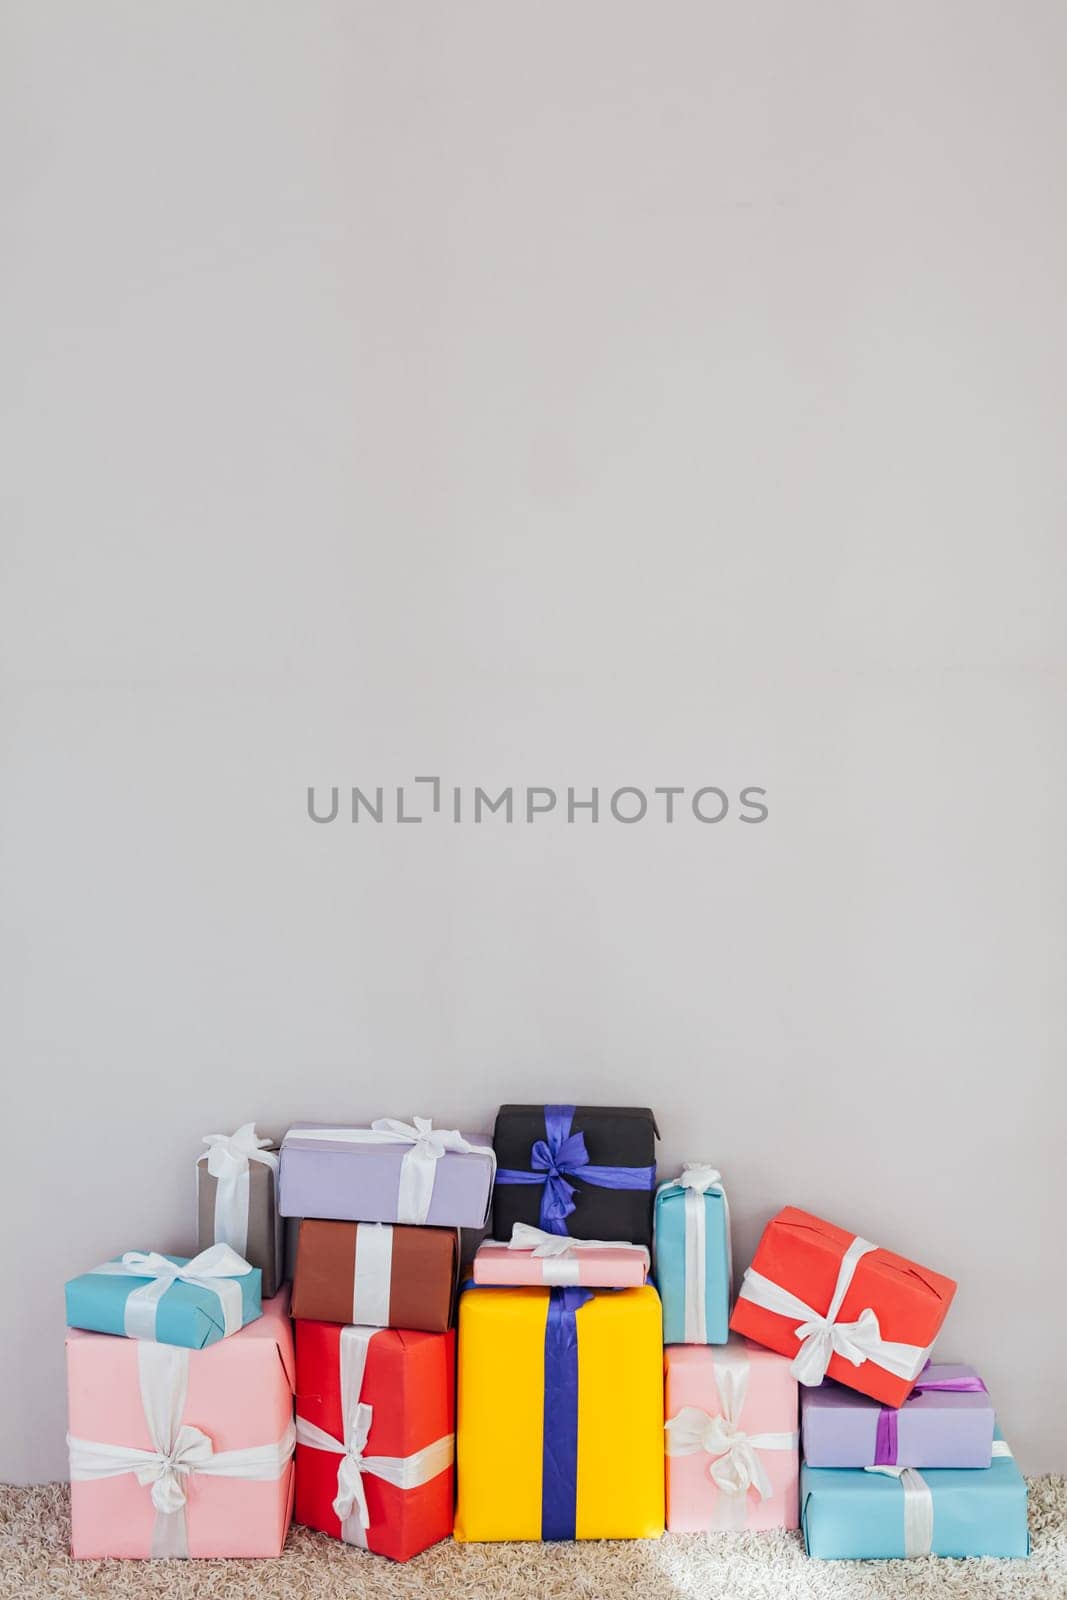 lots of multi-colored gifts on a grey festive background by Simakov